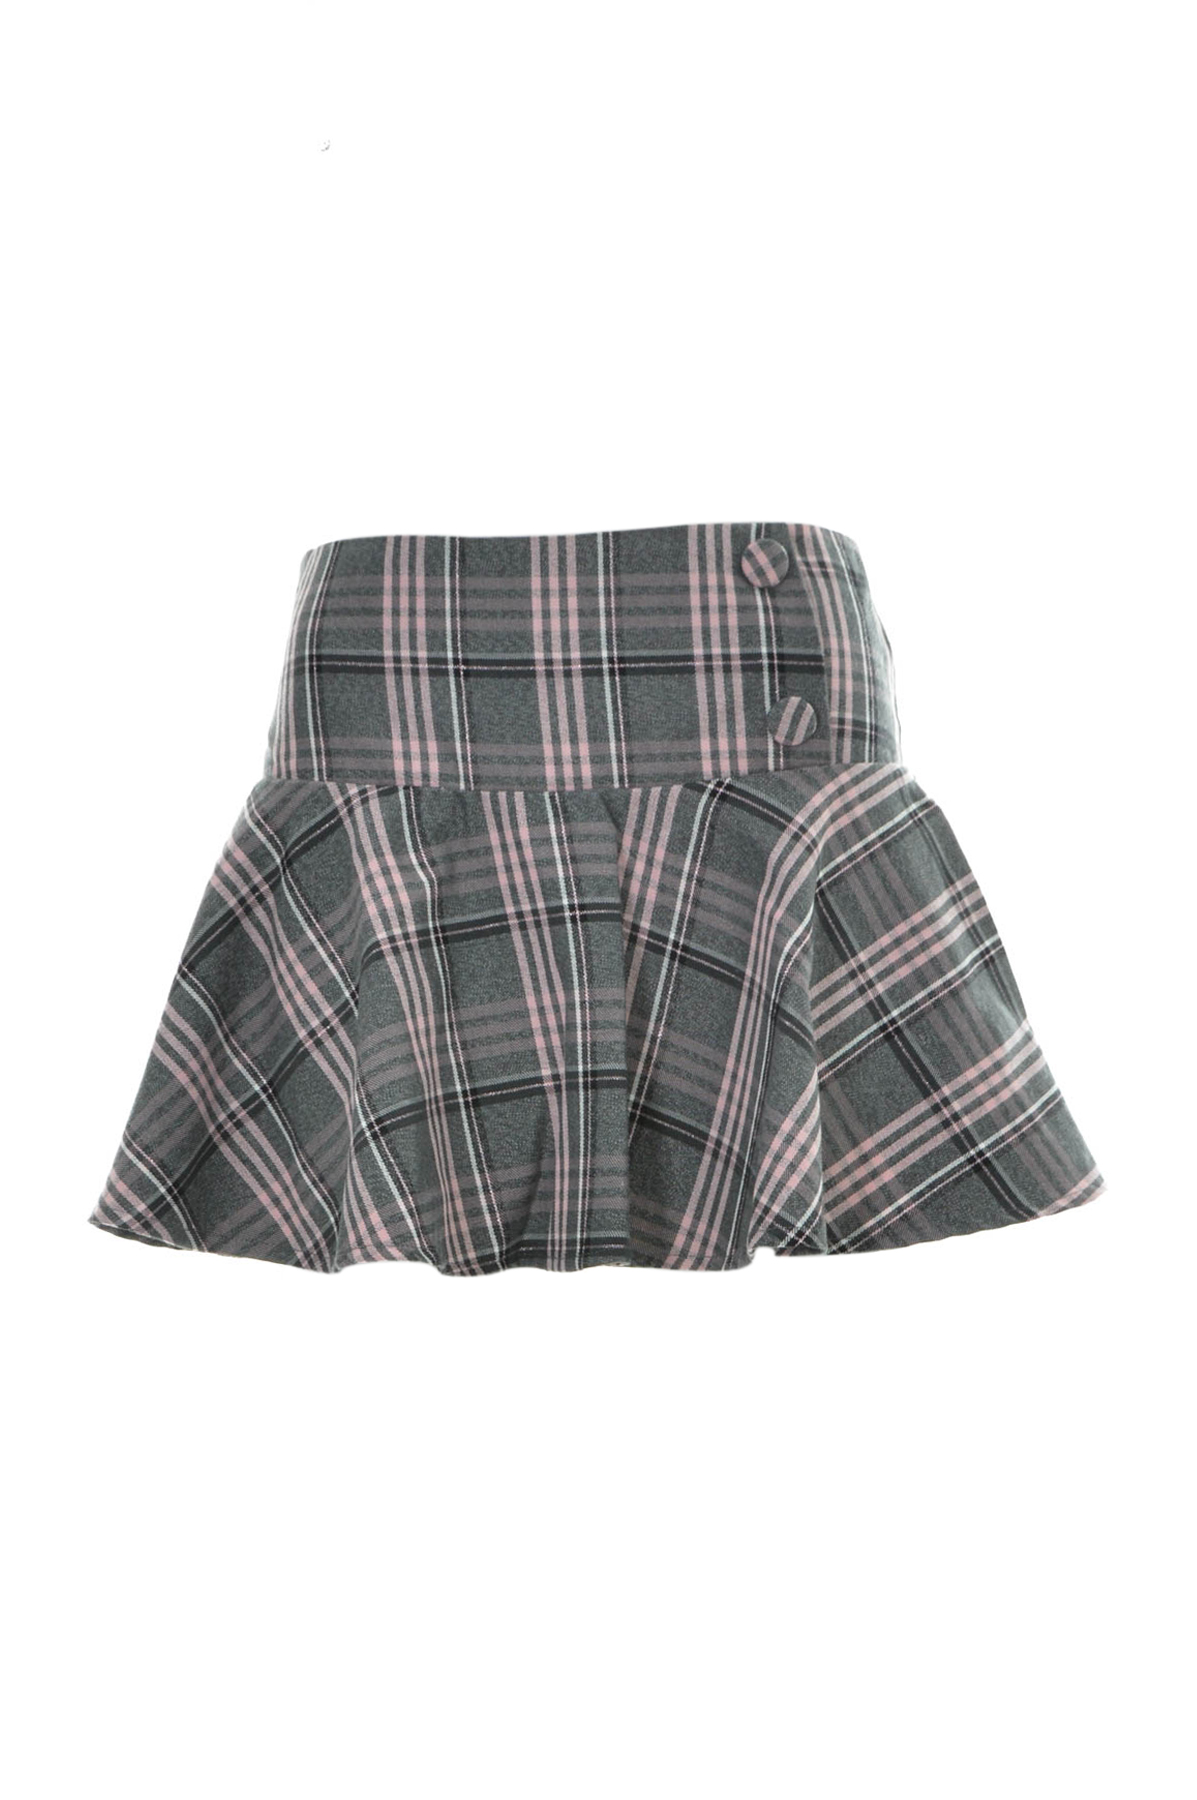 Girls' skirts - Here There - 0